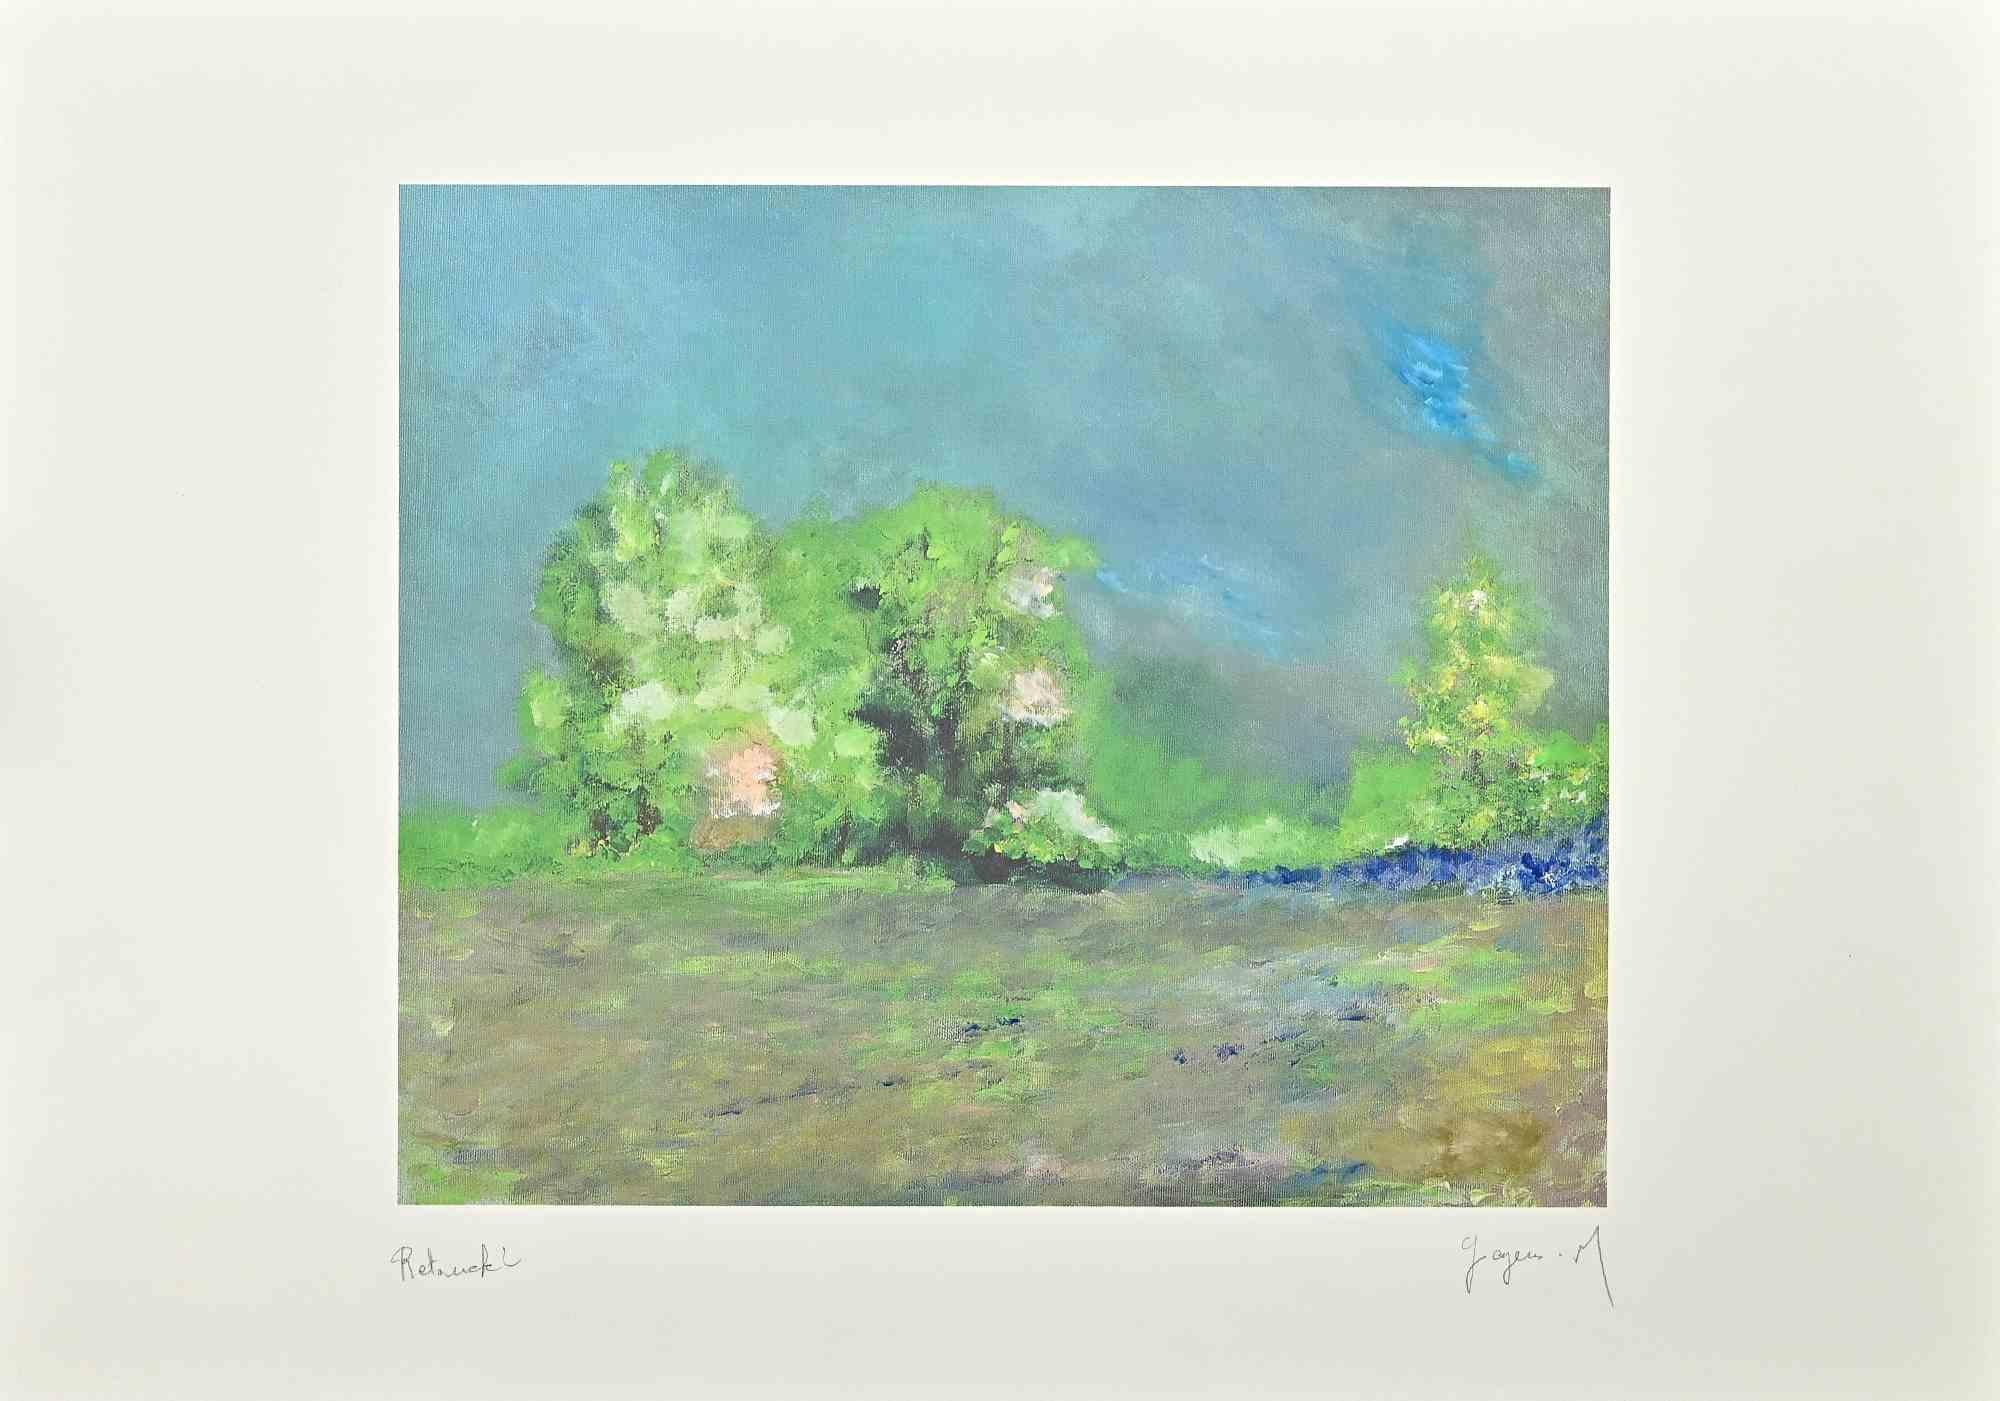 Landscape is a very colorful artwork realized by Martine Goyens in the late 20th Century.

Lithograph print, unique edition retouched by hand, certificate label on the rear.

Hand-signed.

Good conditions.

The artwork id created through harmonious